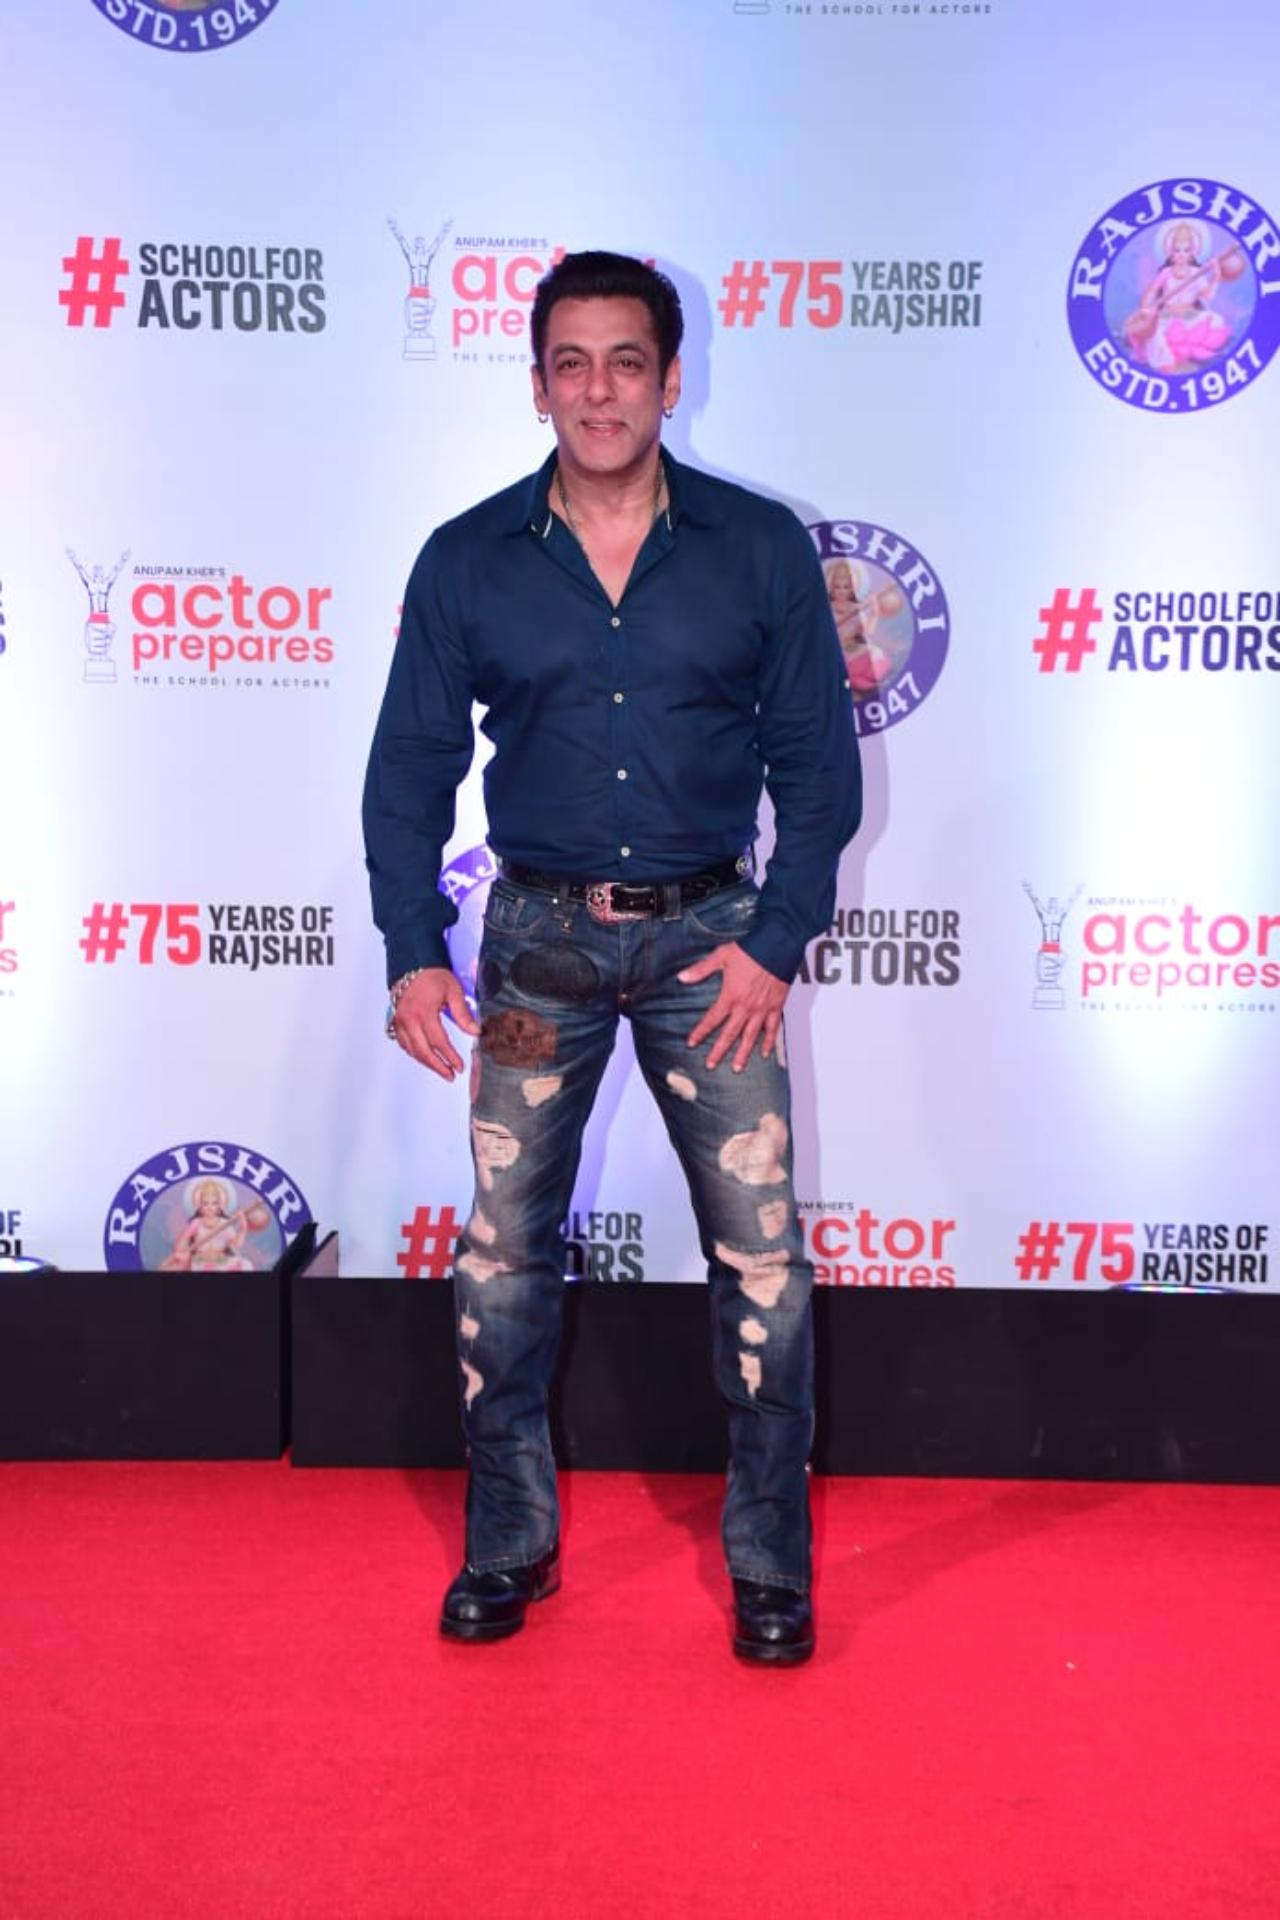 Salman Khan was seen in a jolly mood at the premiere as he interacted with the Barjatya and the cast of the film including Anupam Kher and Boman Irani. The superstar had arrived solo dressed in a navy blue shirt and blue denims